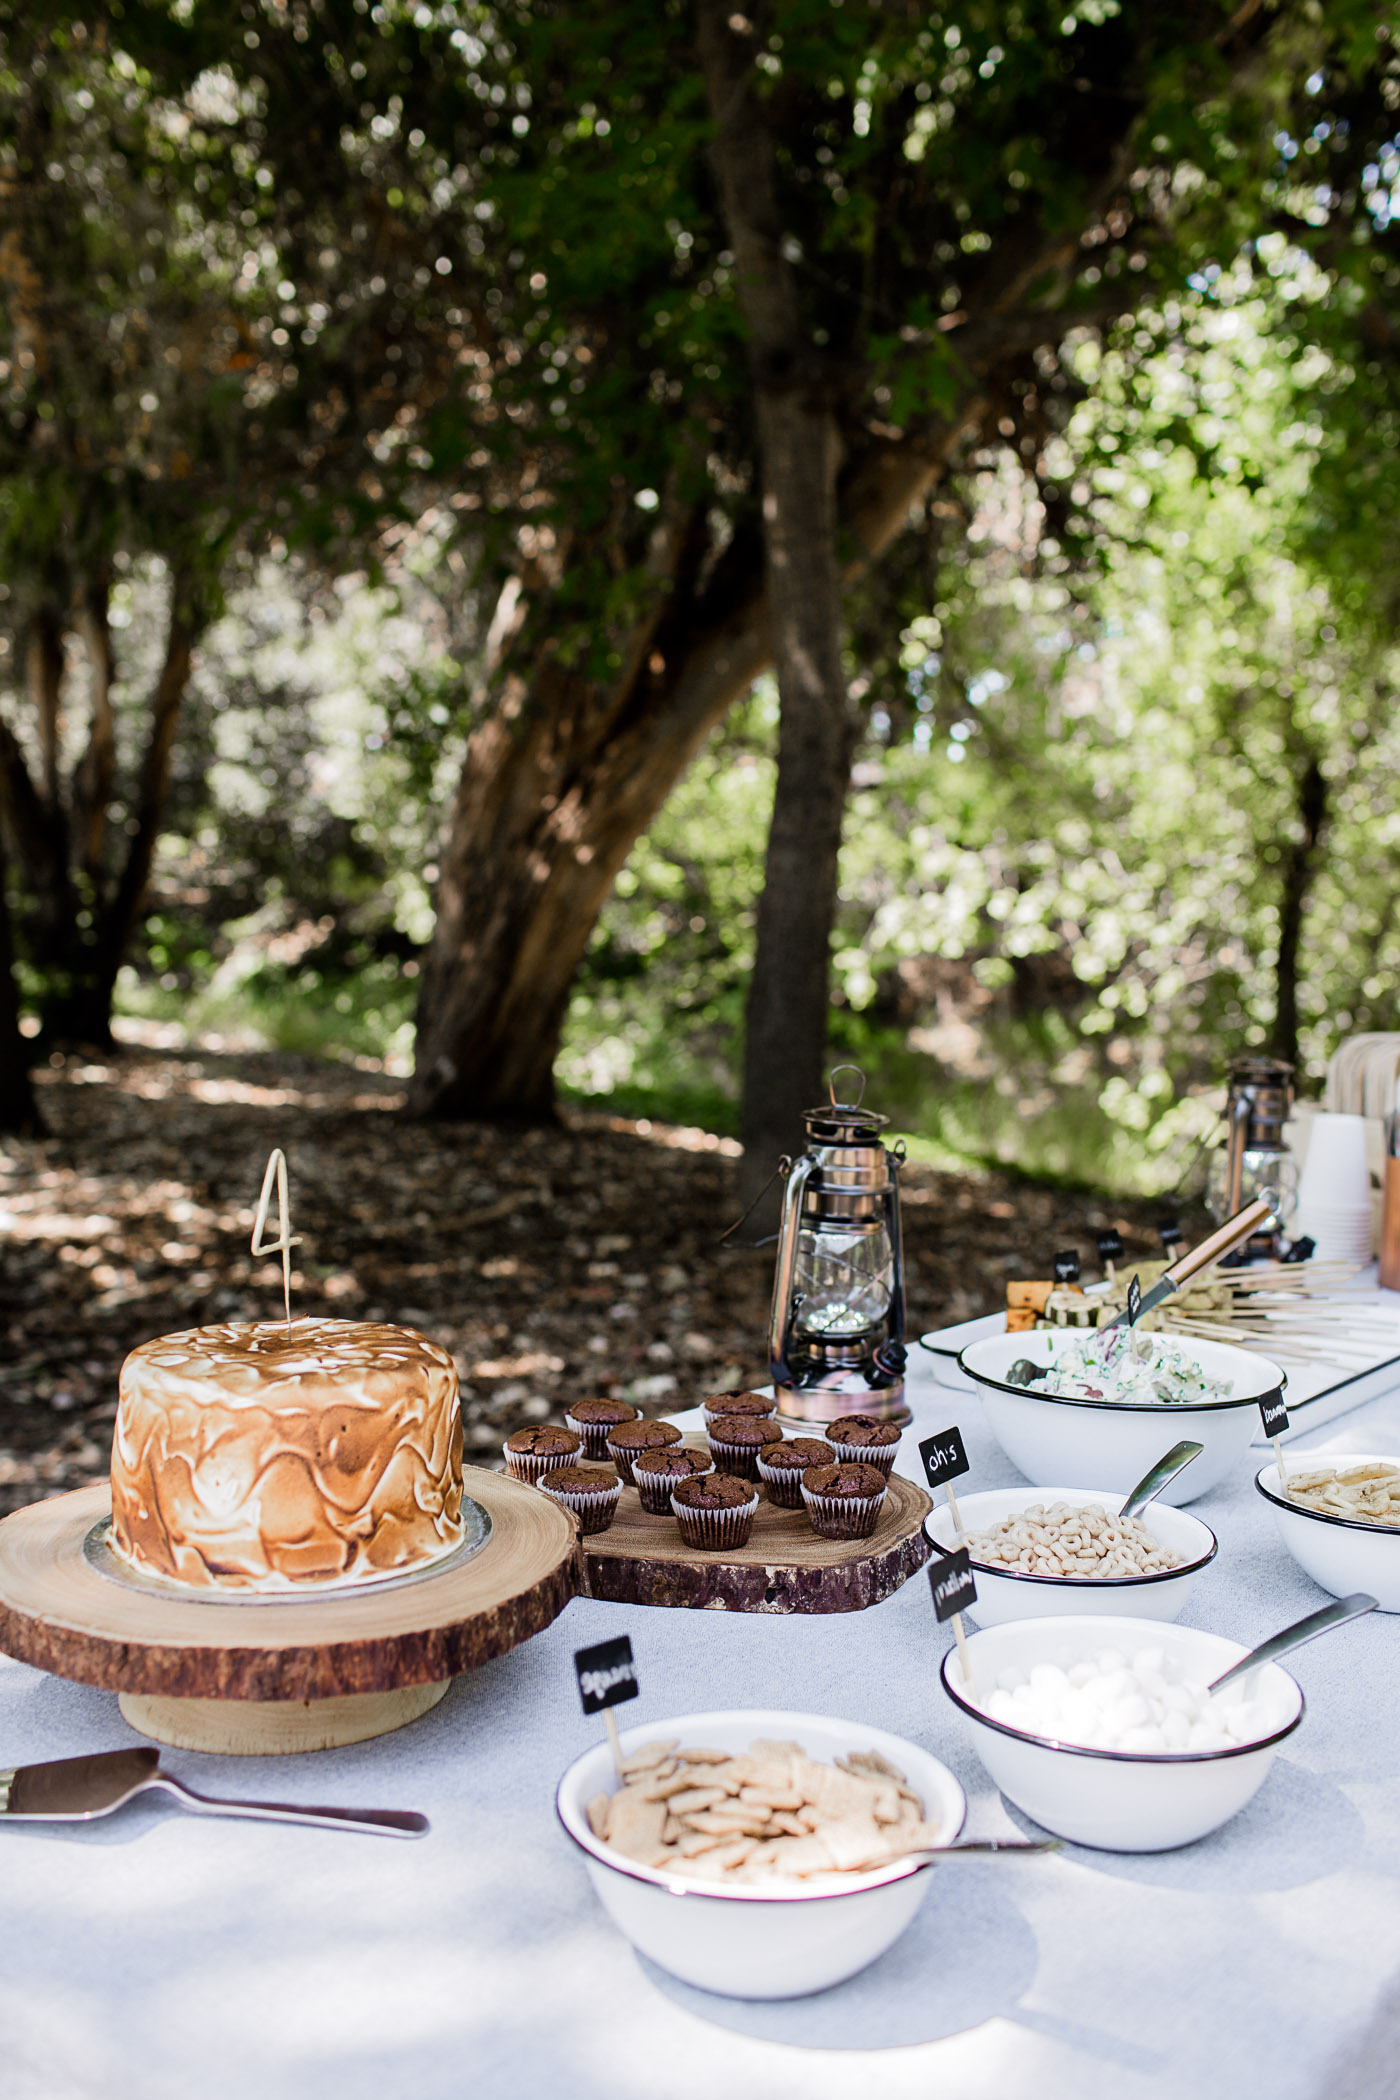 5 Tips for Throwing a Memorable Birthday Party